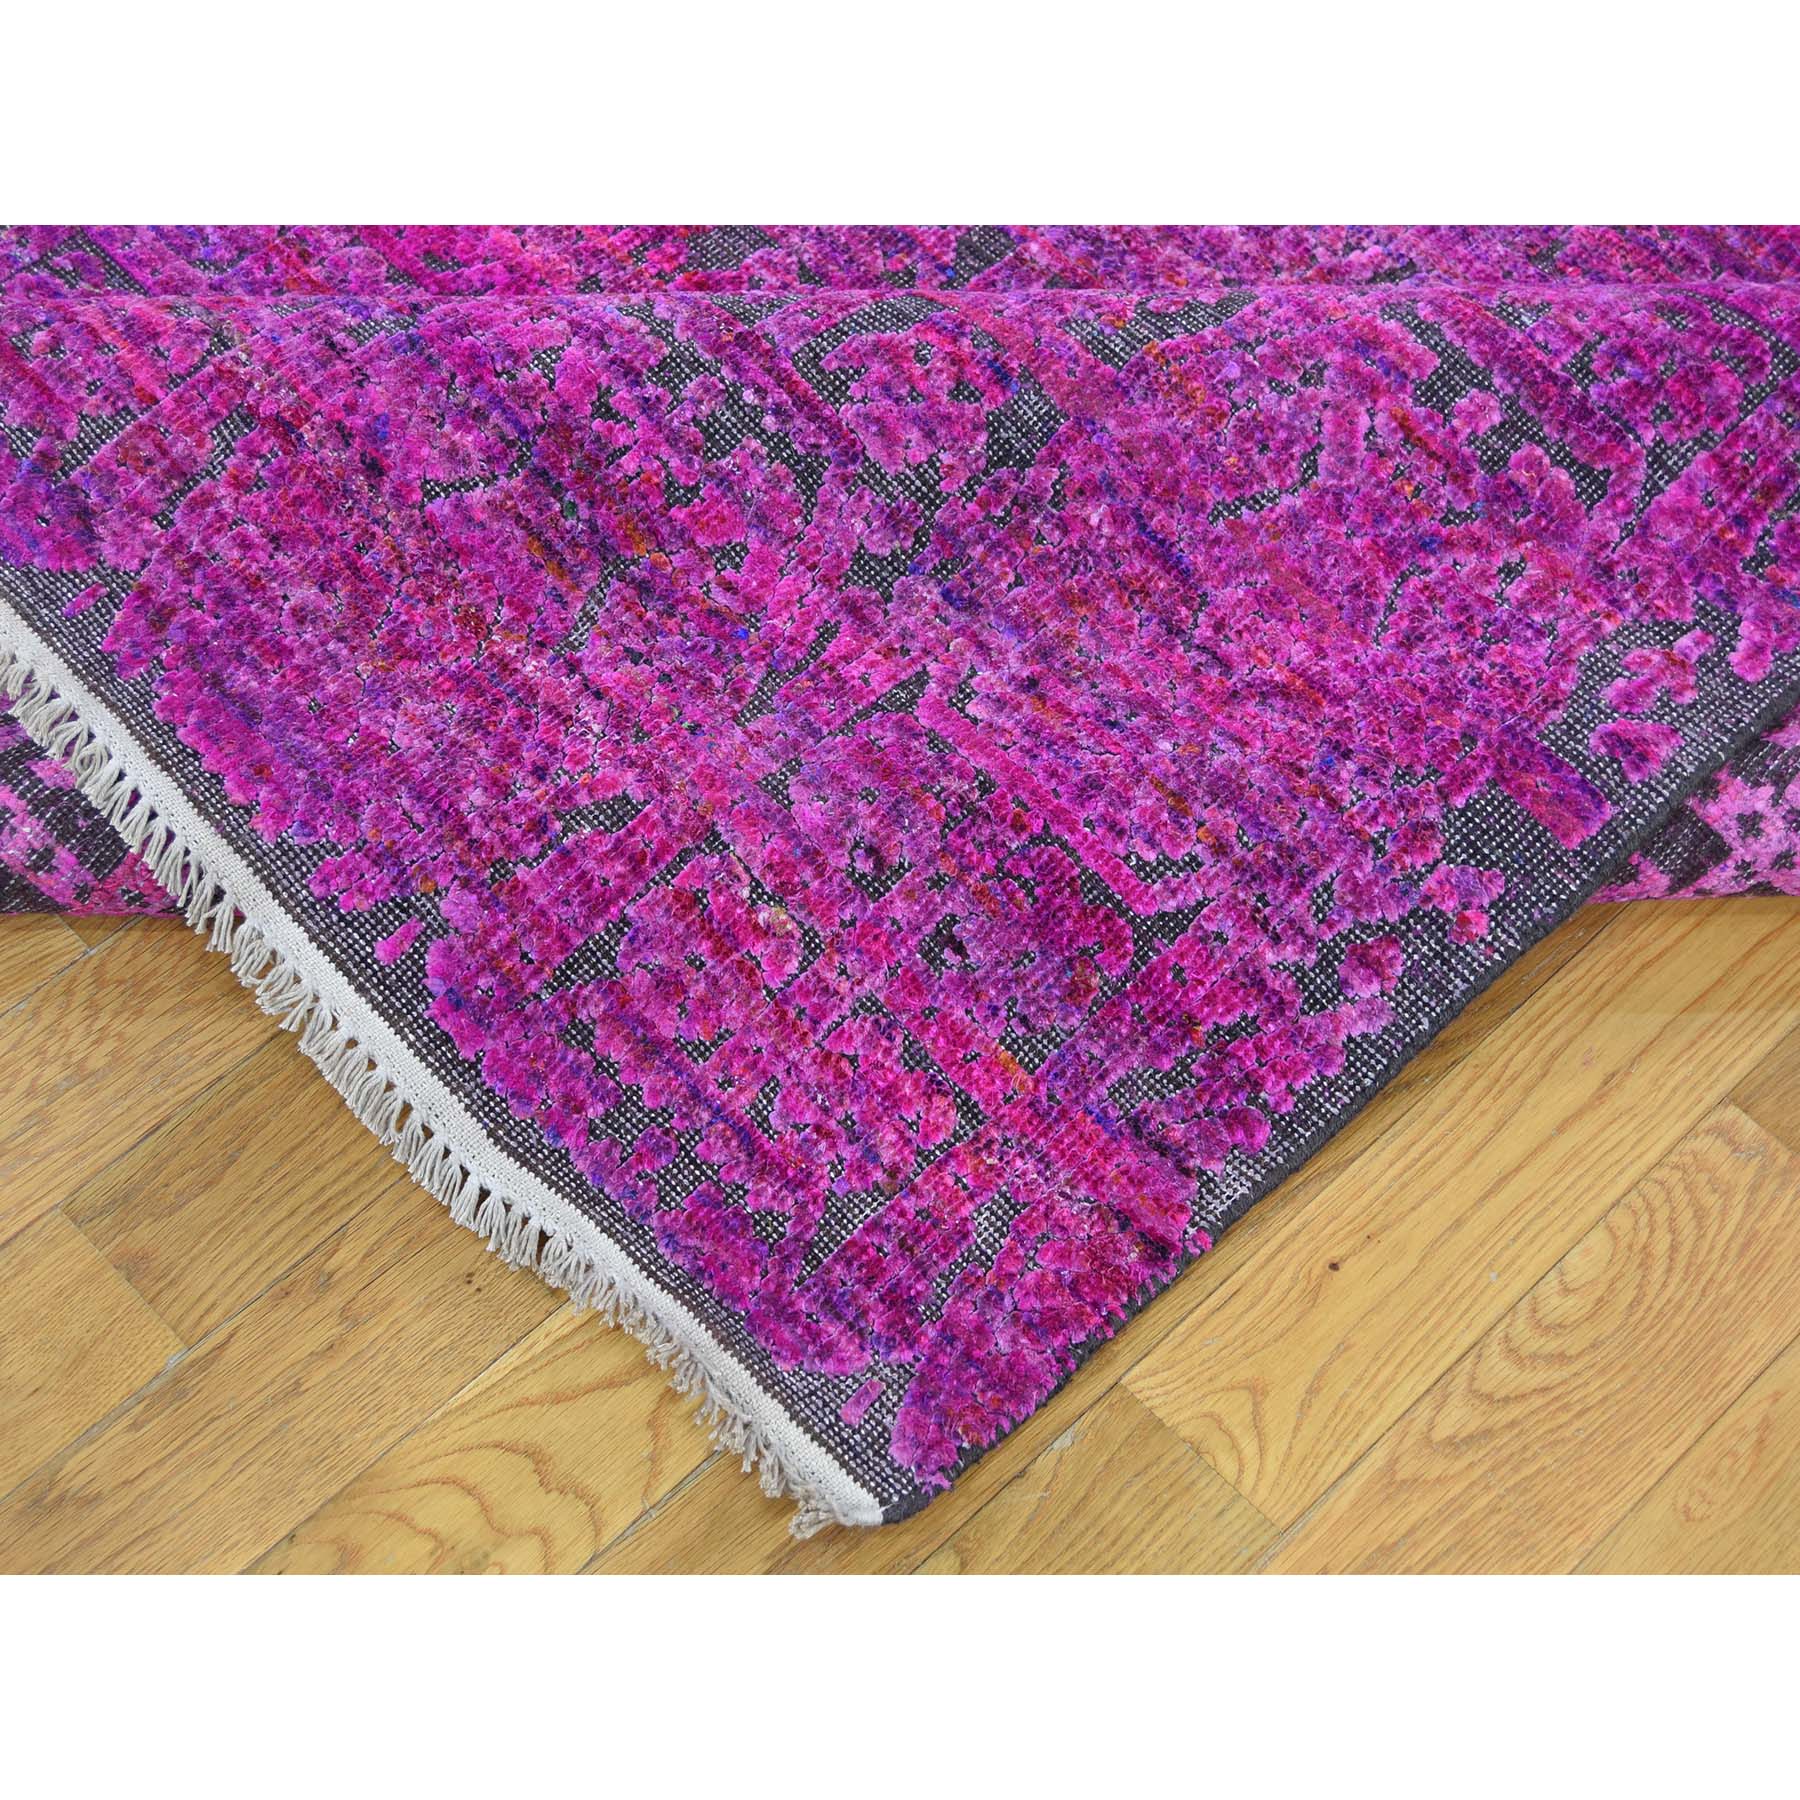 8-10 x11-10  Fuchsia Colors Sari Silk with Textured Wool Hand-Knotted Oriental Rug 